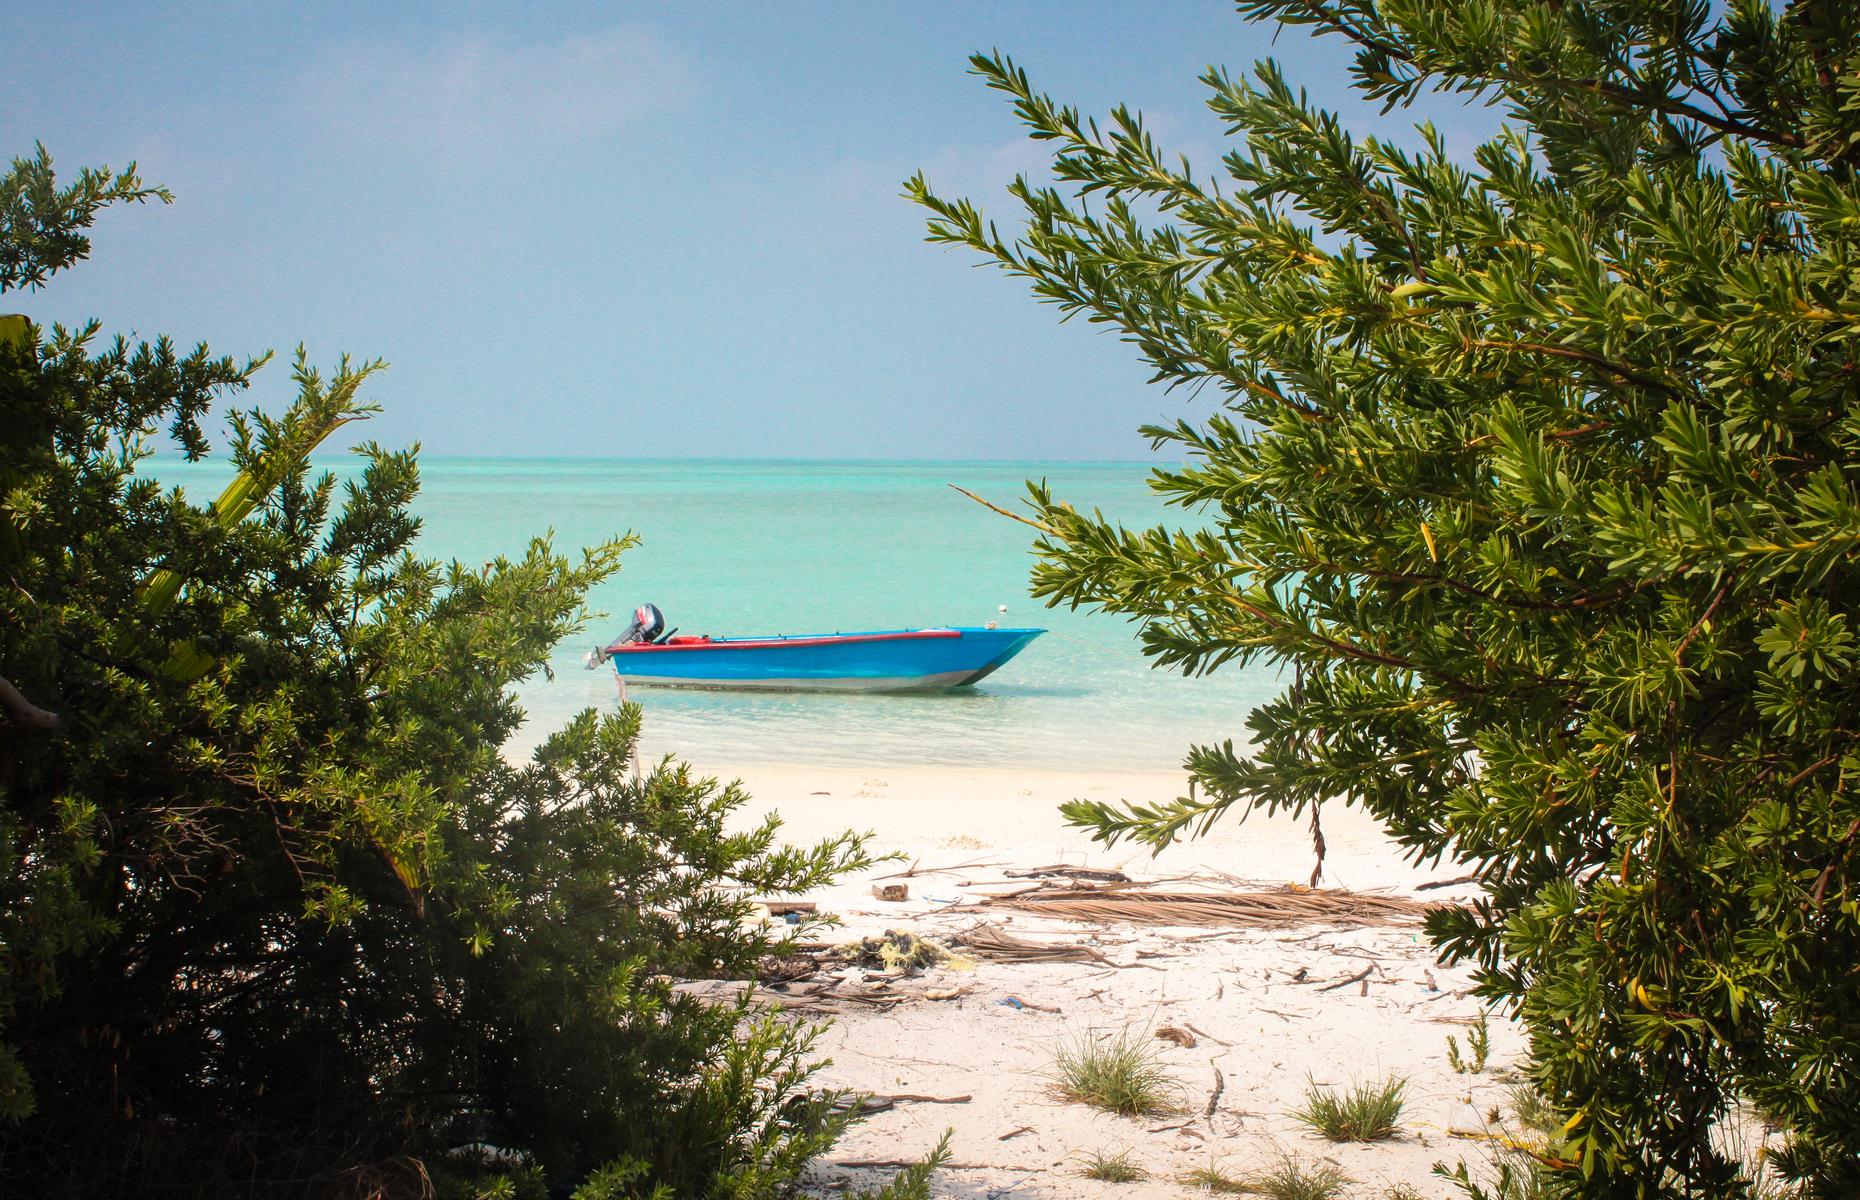 <p>Scattered off the Keralan coast in the Arabian Sea, this chain of islands, atolls, and reefs is about as idyllic as it gets. The isles are all coconut groves and sandy beaches with coral reef-edged shallow lagoons, rich in tropical fish.</p>  <p>Out of the 36 islands, only 10 are inhabited and visitors can only stay on three – Agatti, Bangaram, and Kadmat Islands.</p>